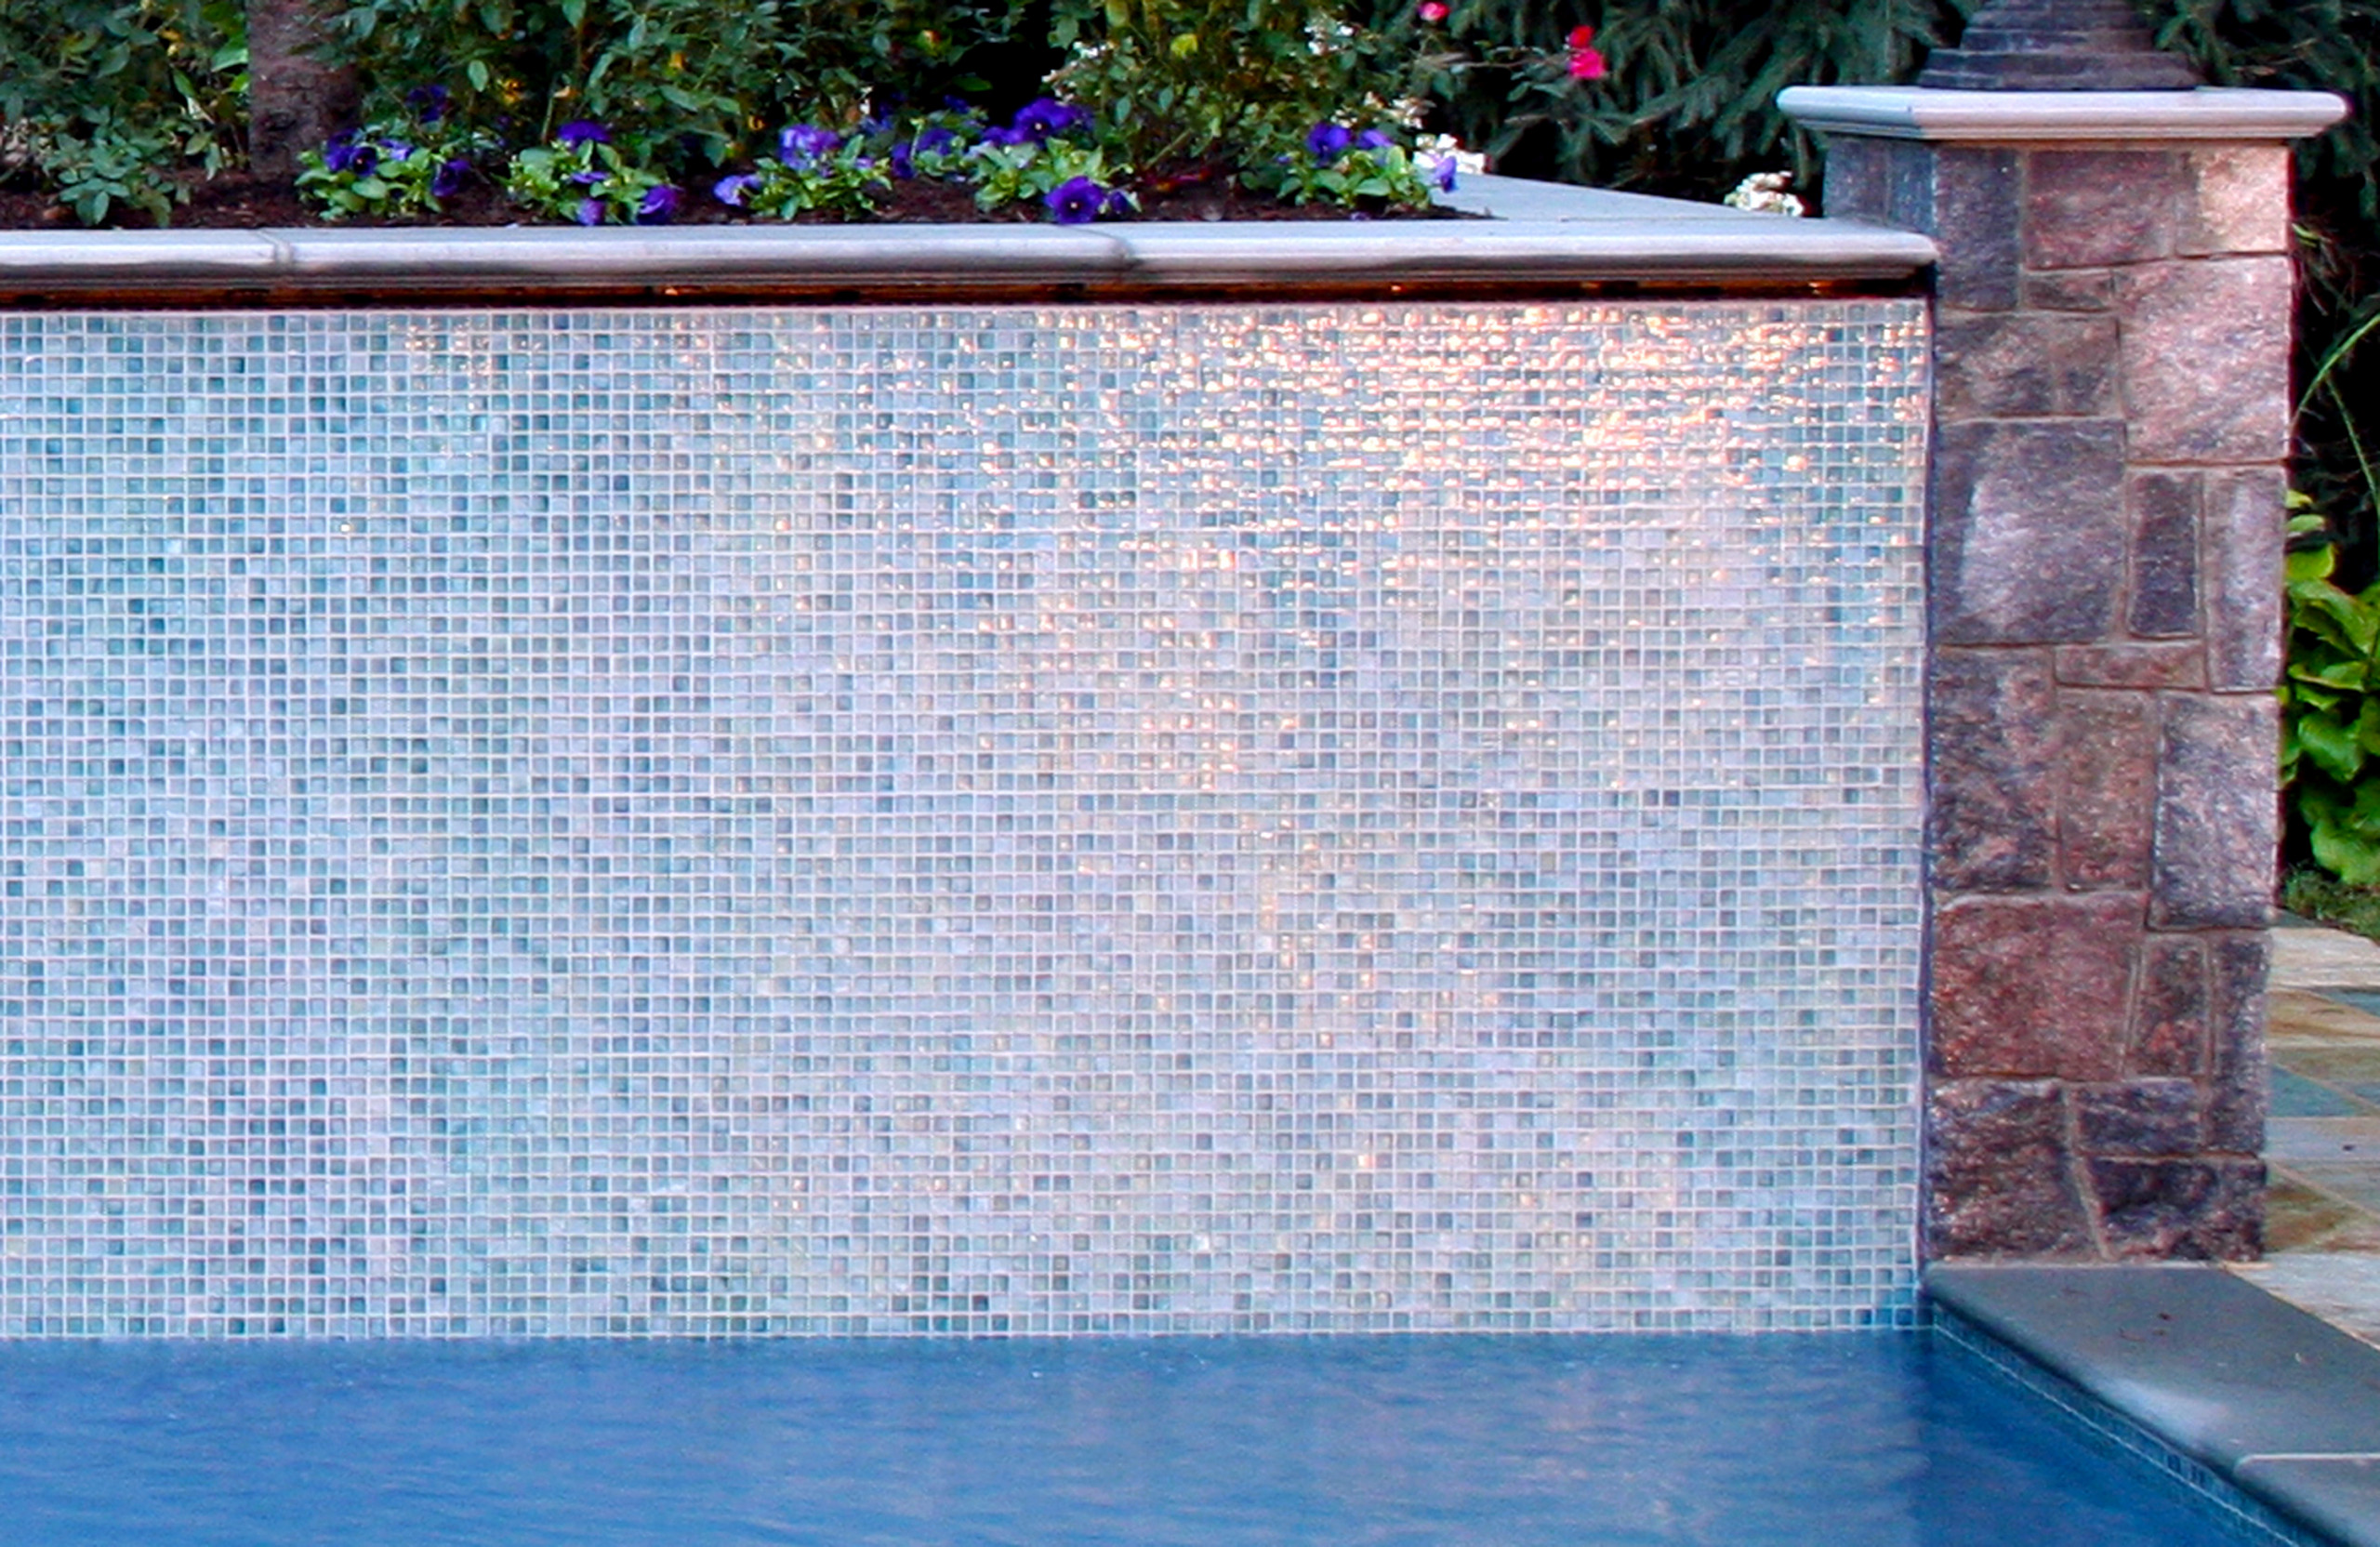 Nj Swimming Pool Glass Tile Water Wall, Pictures Of Glass Tile Pool Designs